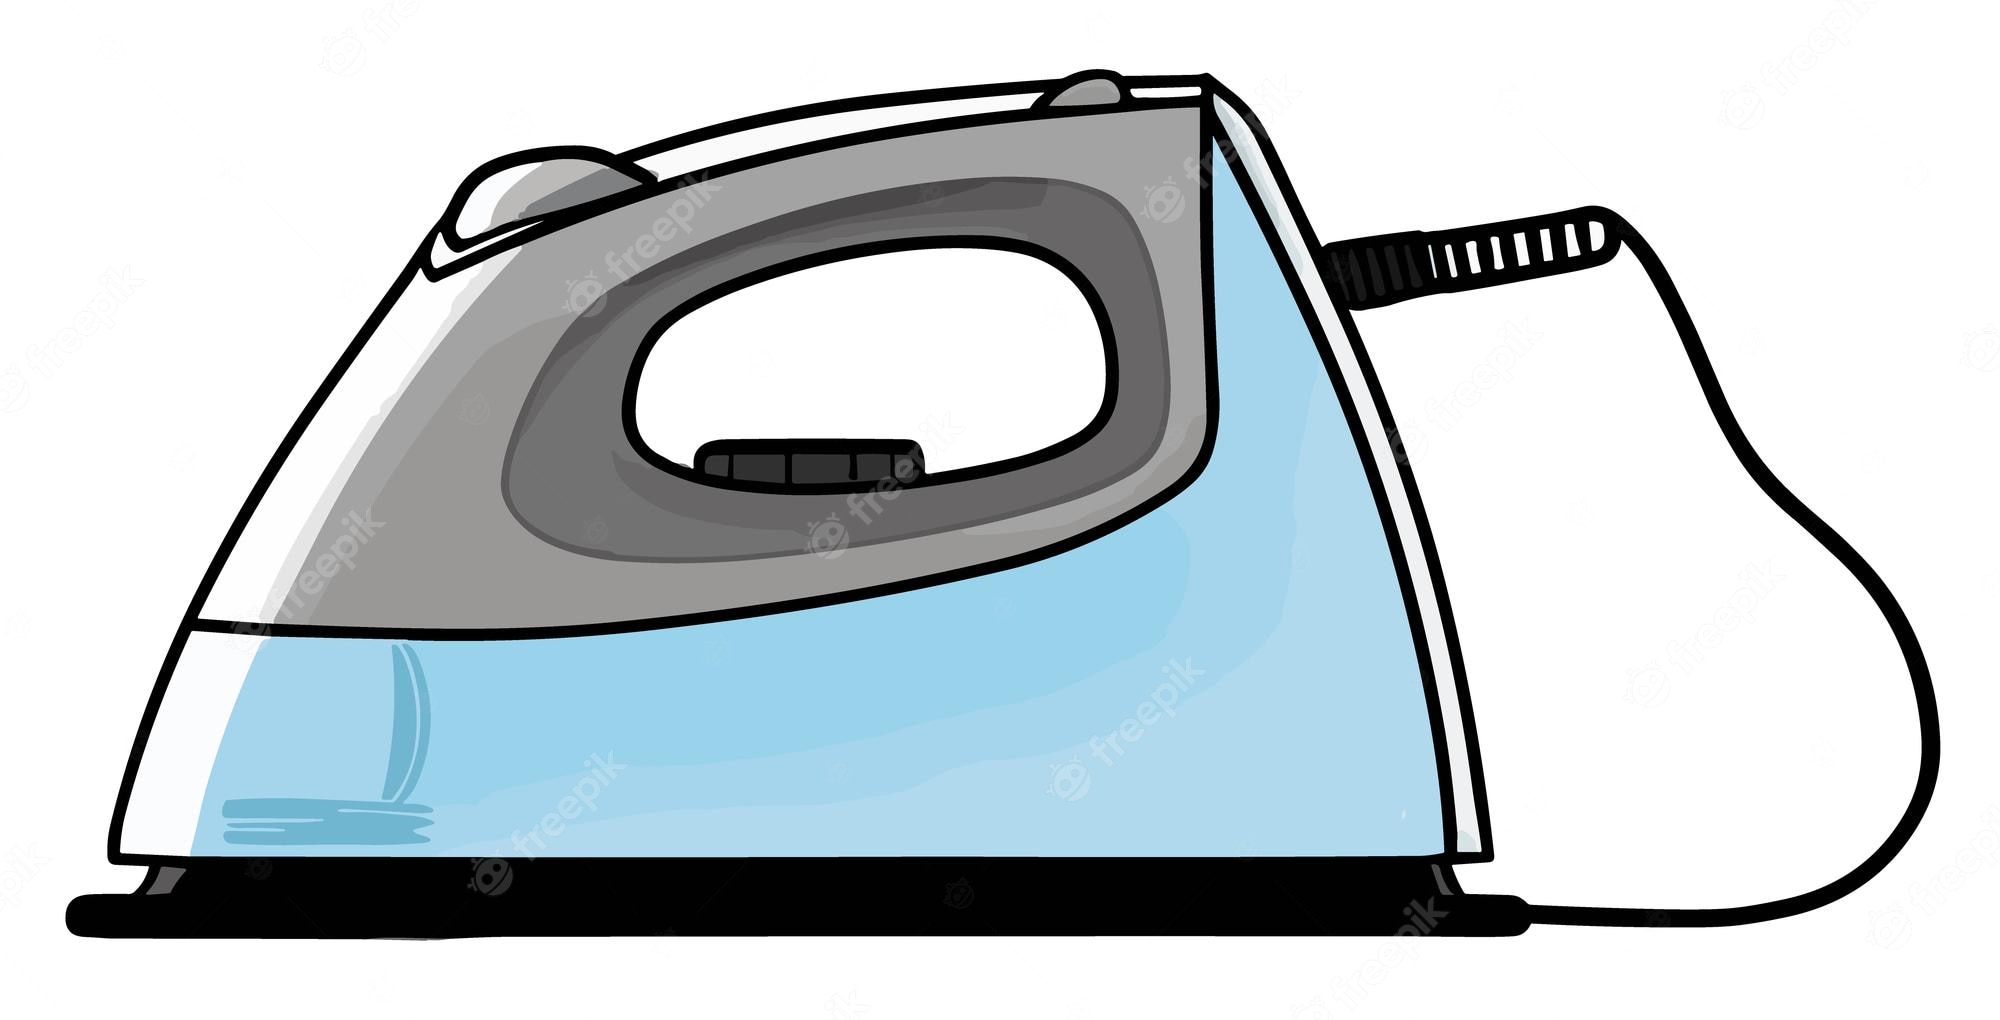 irons - Clip Art Library